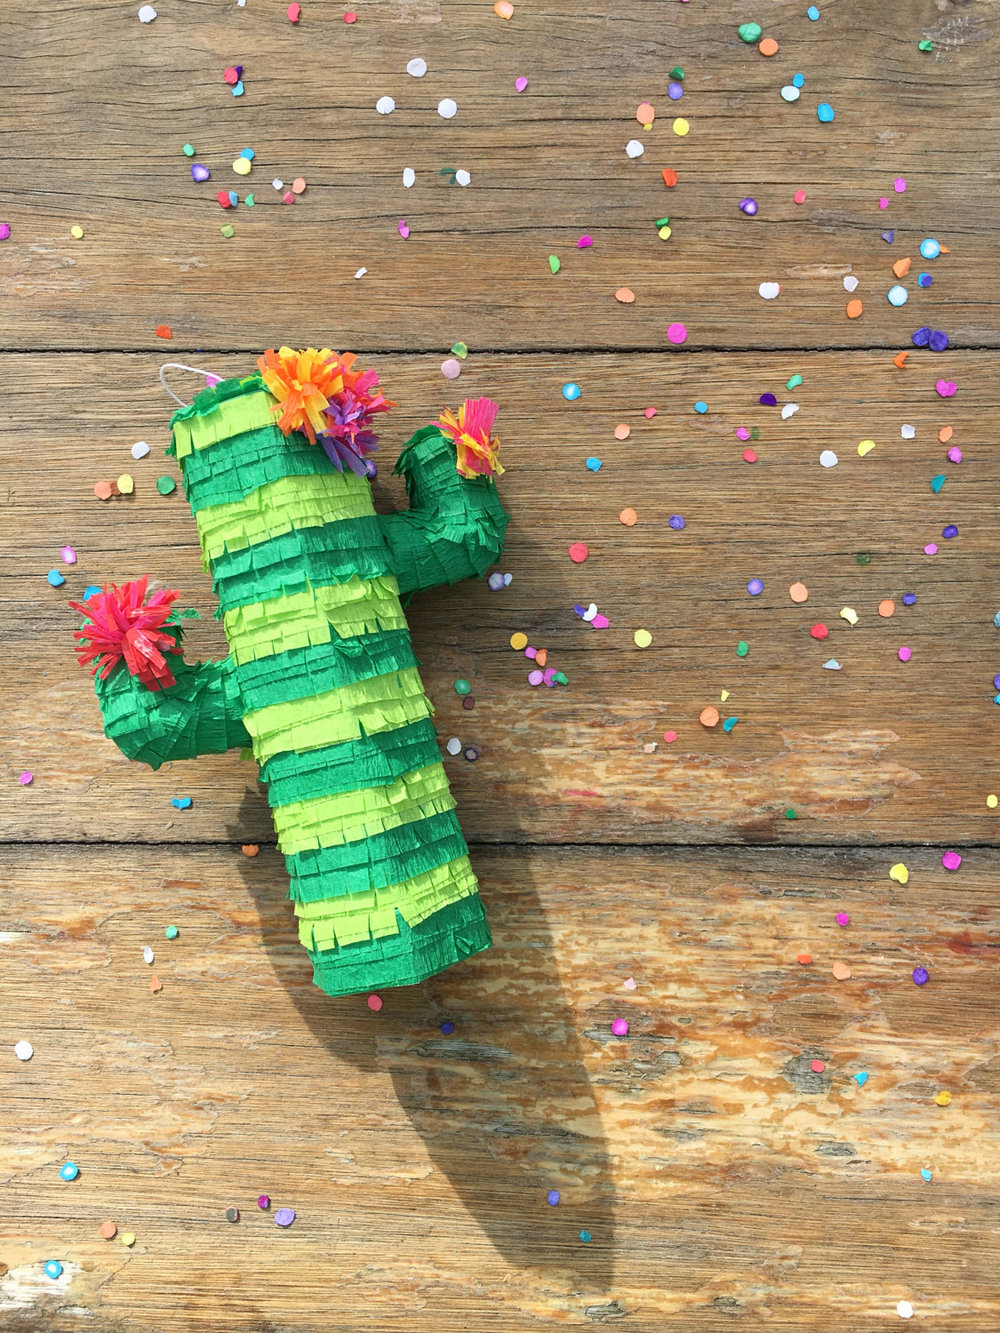  Mini Cactus Pinatas are perfect for place settings or centerpieces to hold the table number. As seen in Cactus Wedding Ideas - a hot wedding trend on www.BrendasWeddingBlog.com 